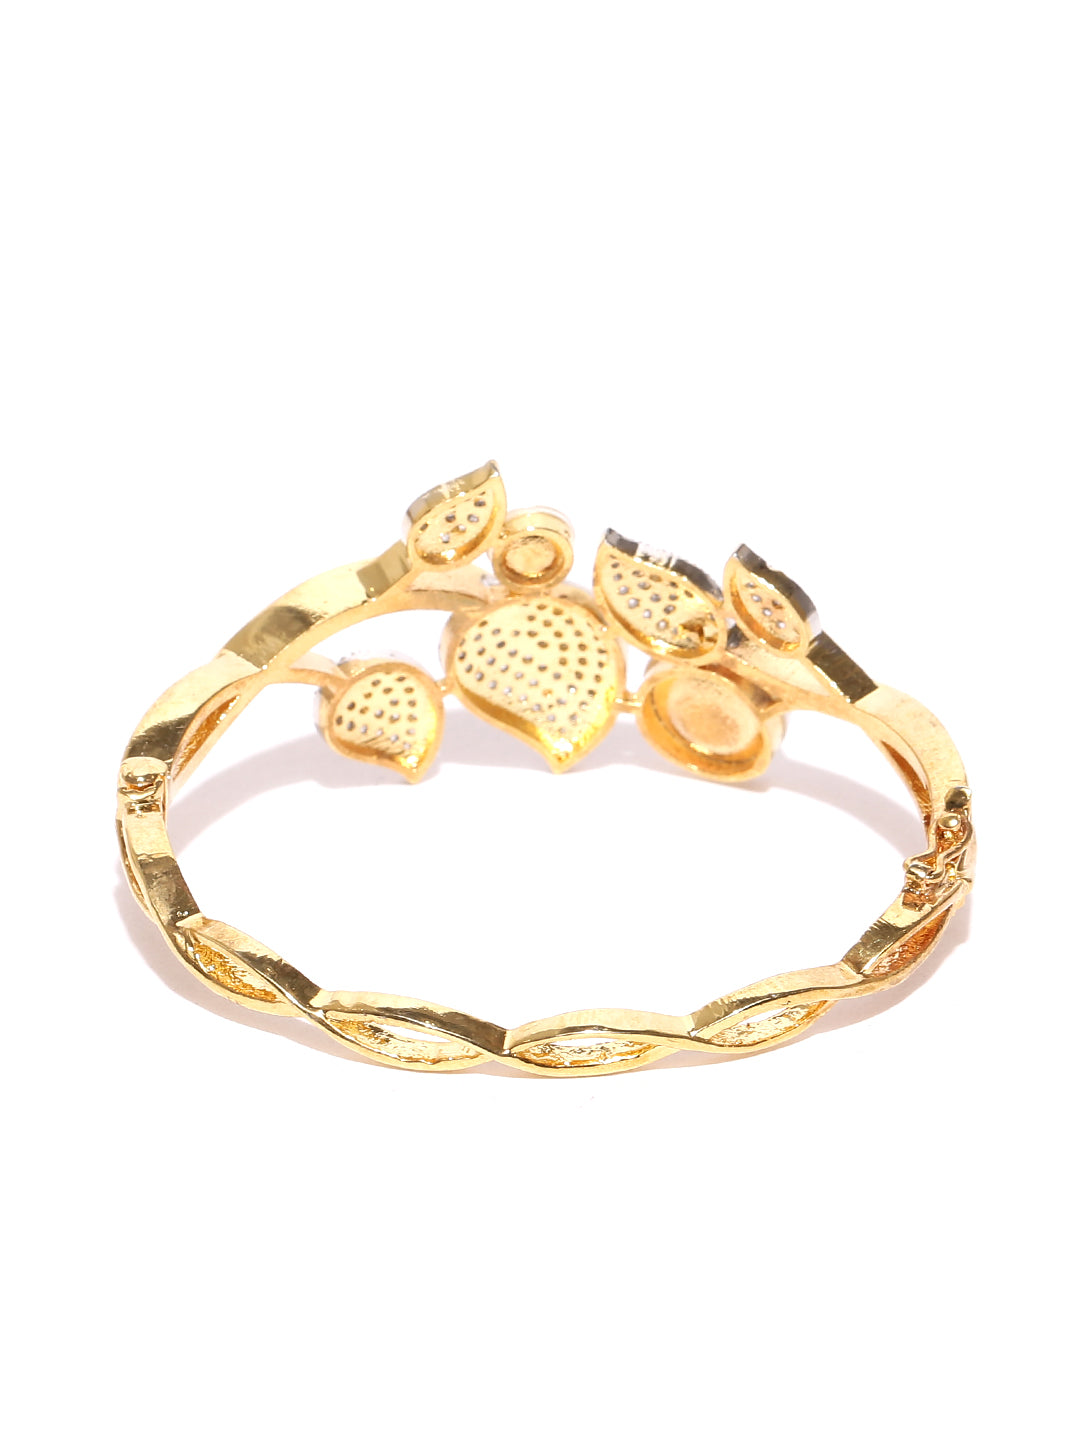 Gold-Plated American Diamond and Pearls Studded Bracelet in Floral Pattern